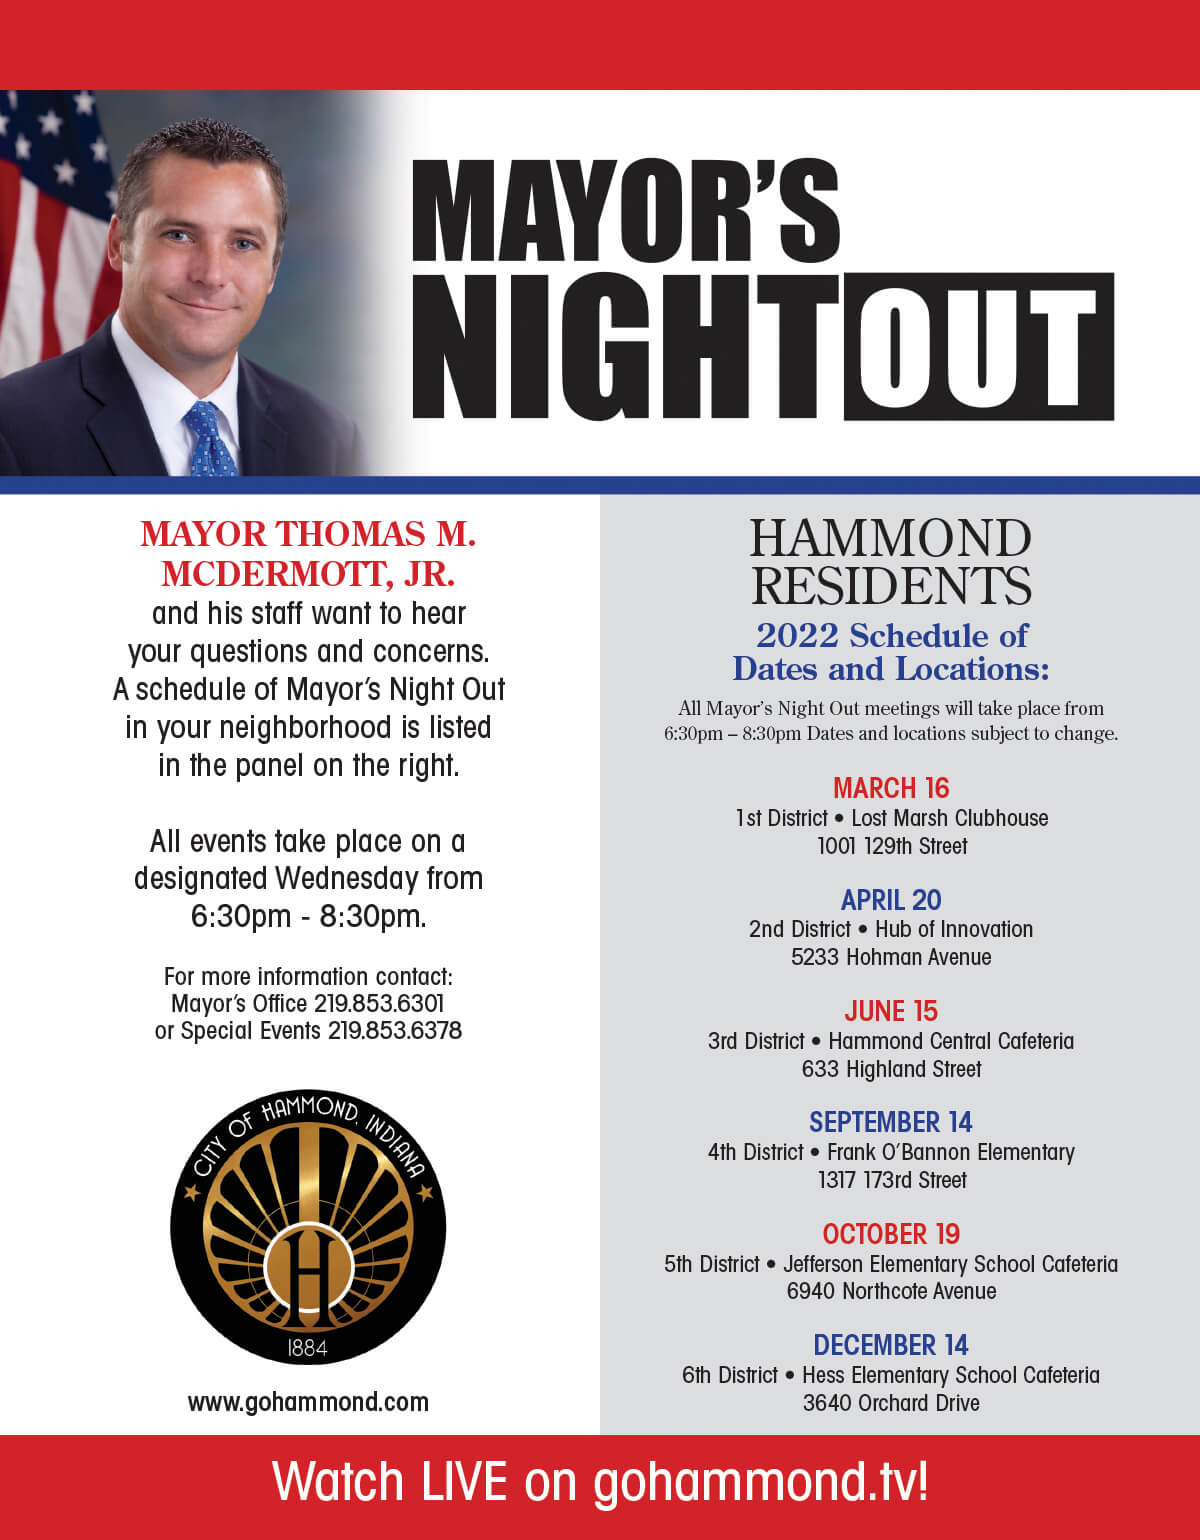 2021 Mayor's Night Out Schedule